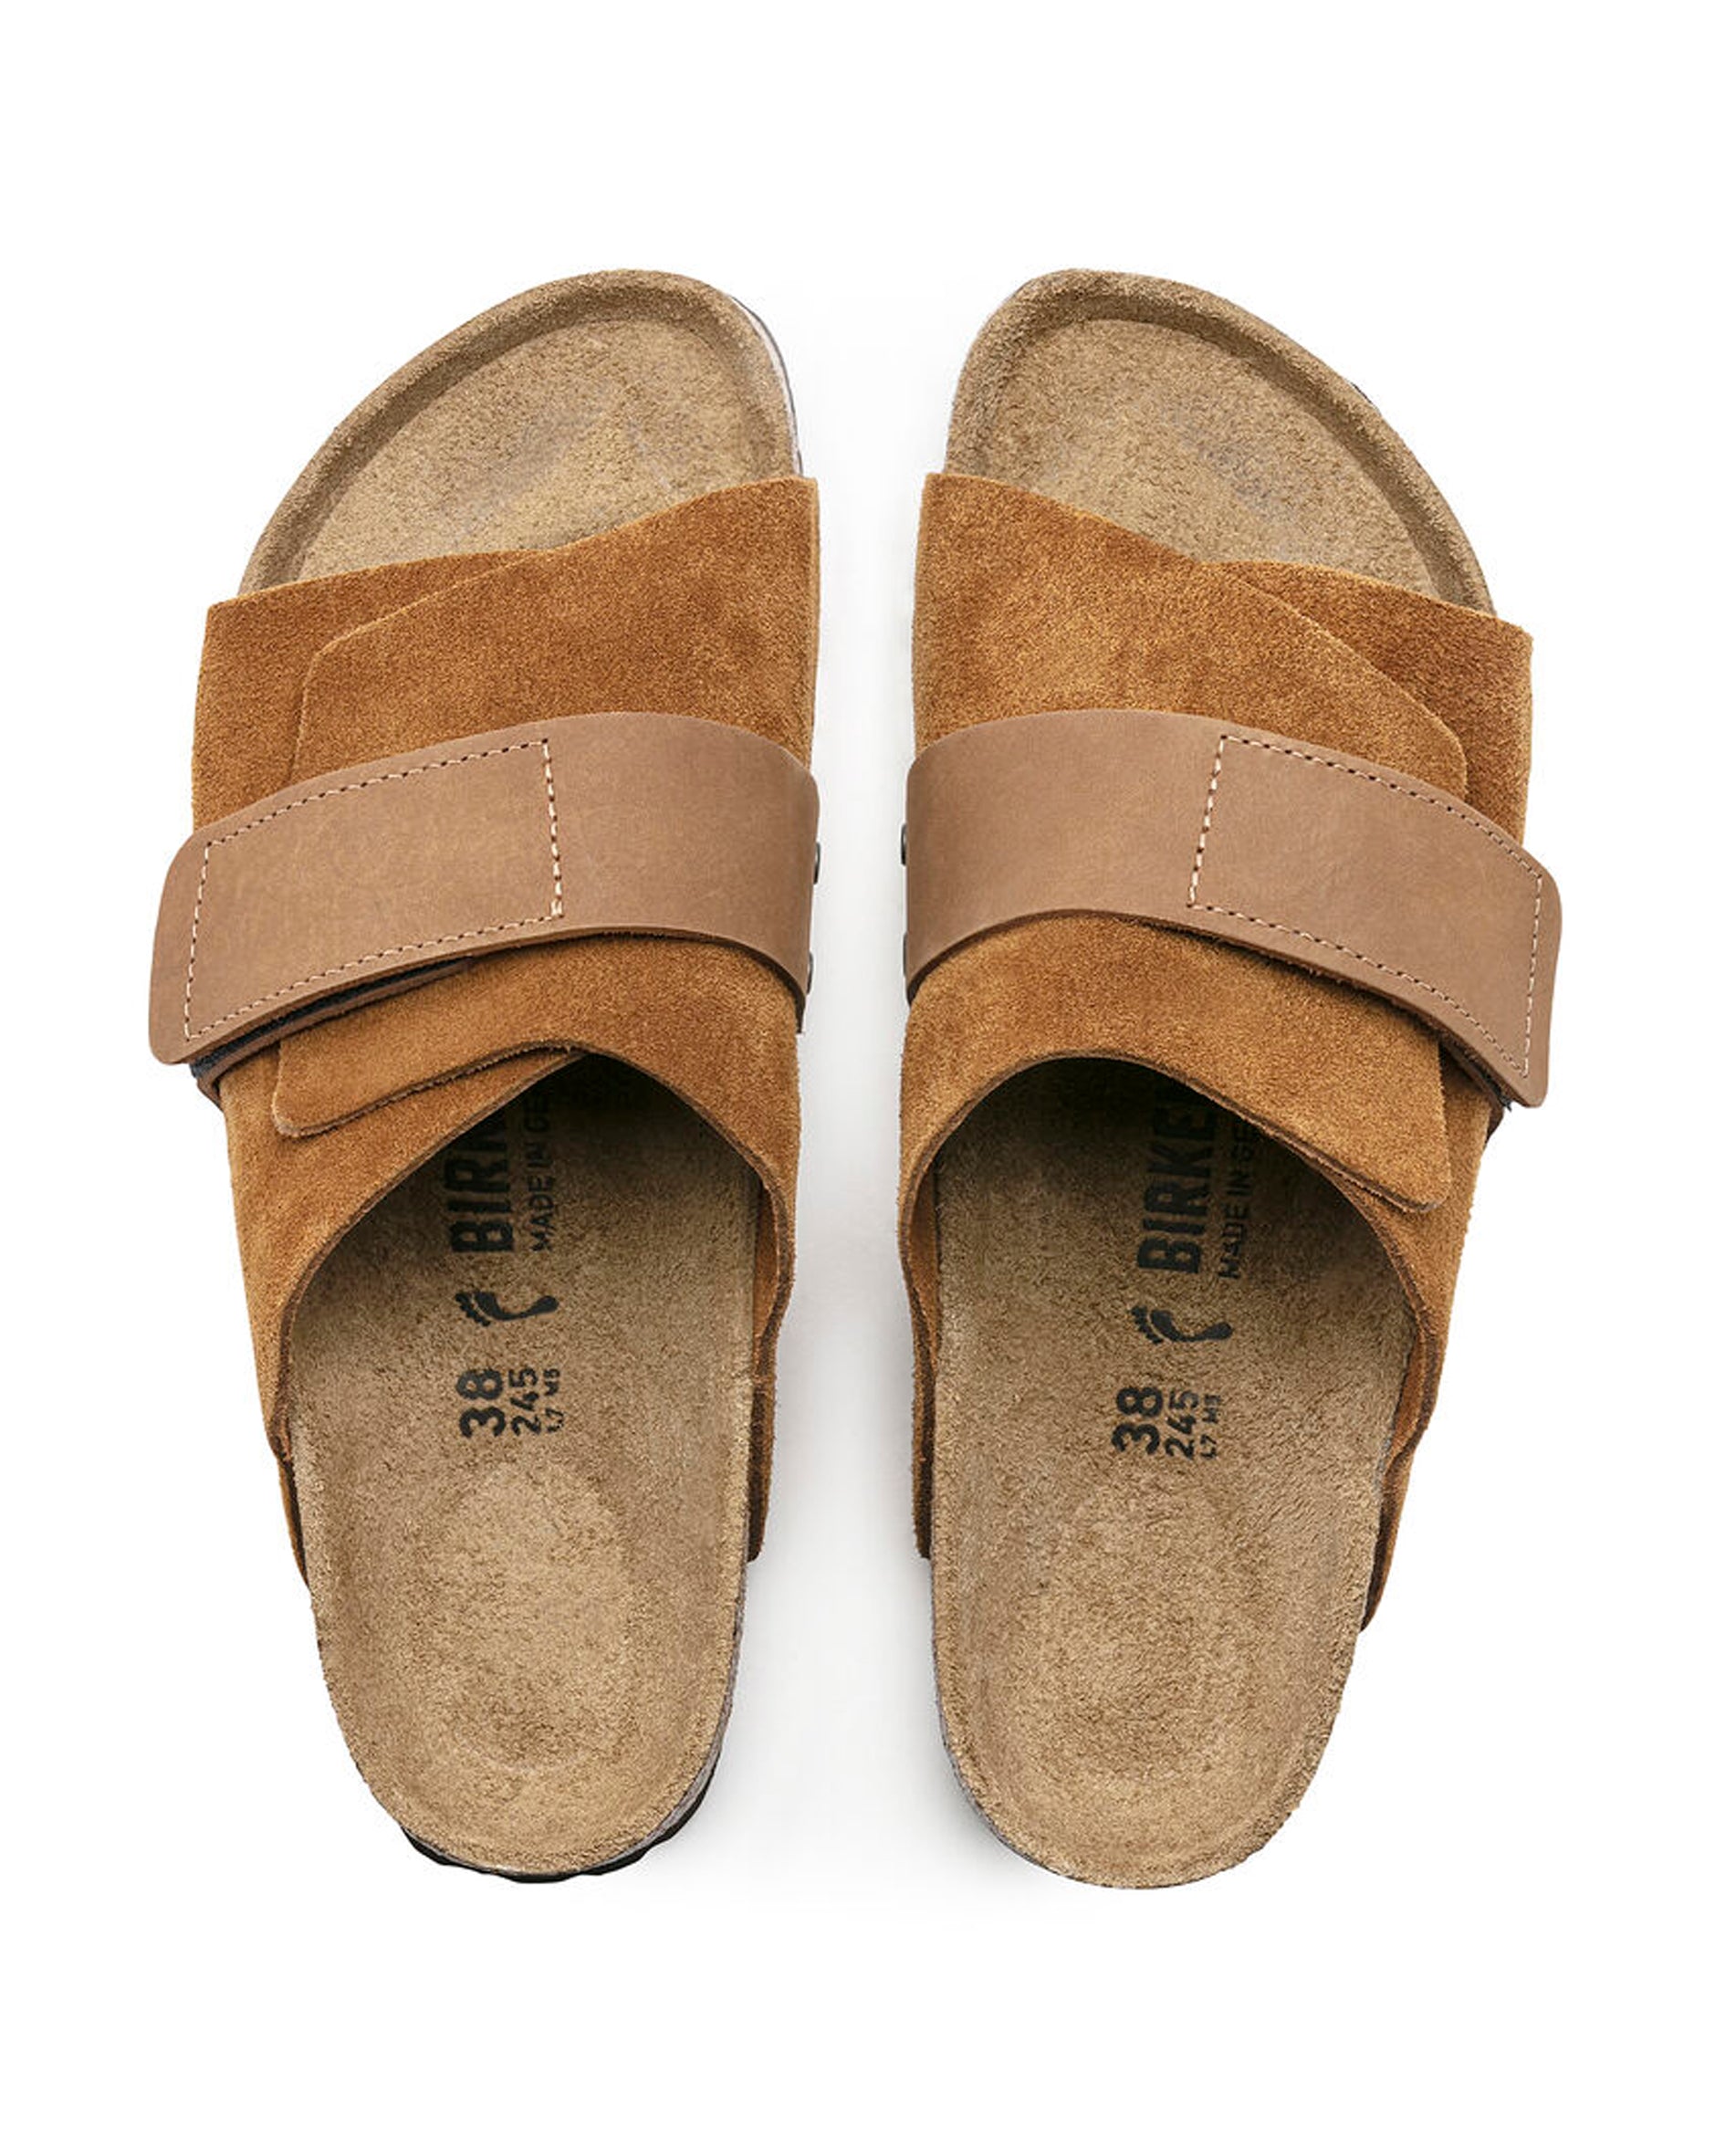 Kyoto Mink Suede Leather Sandals